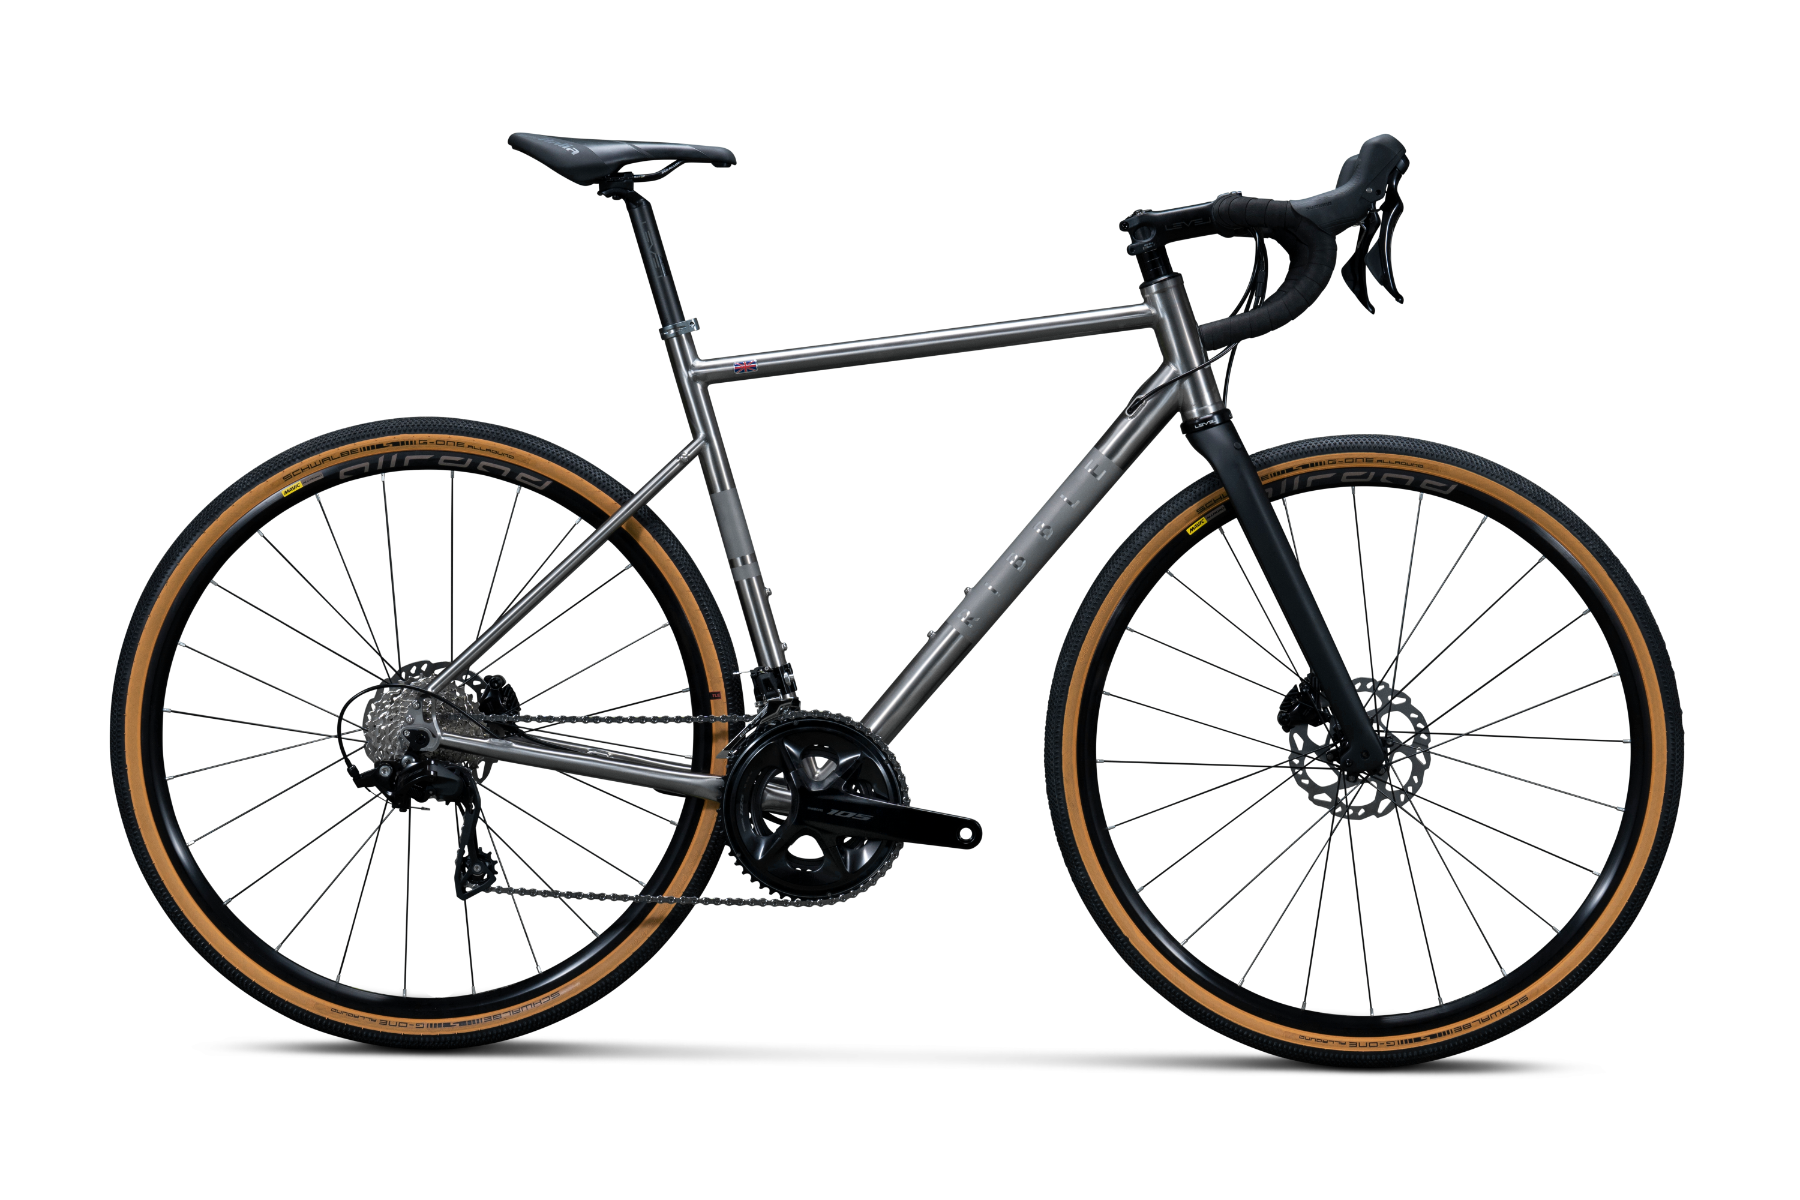 Ribble CGR Ti Sport titanium gravel bike with Shimano 105 groupset, disc brakes, and fenders